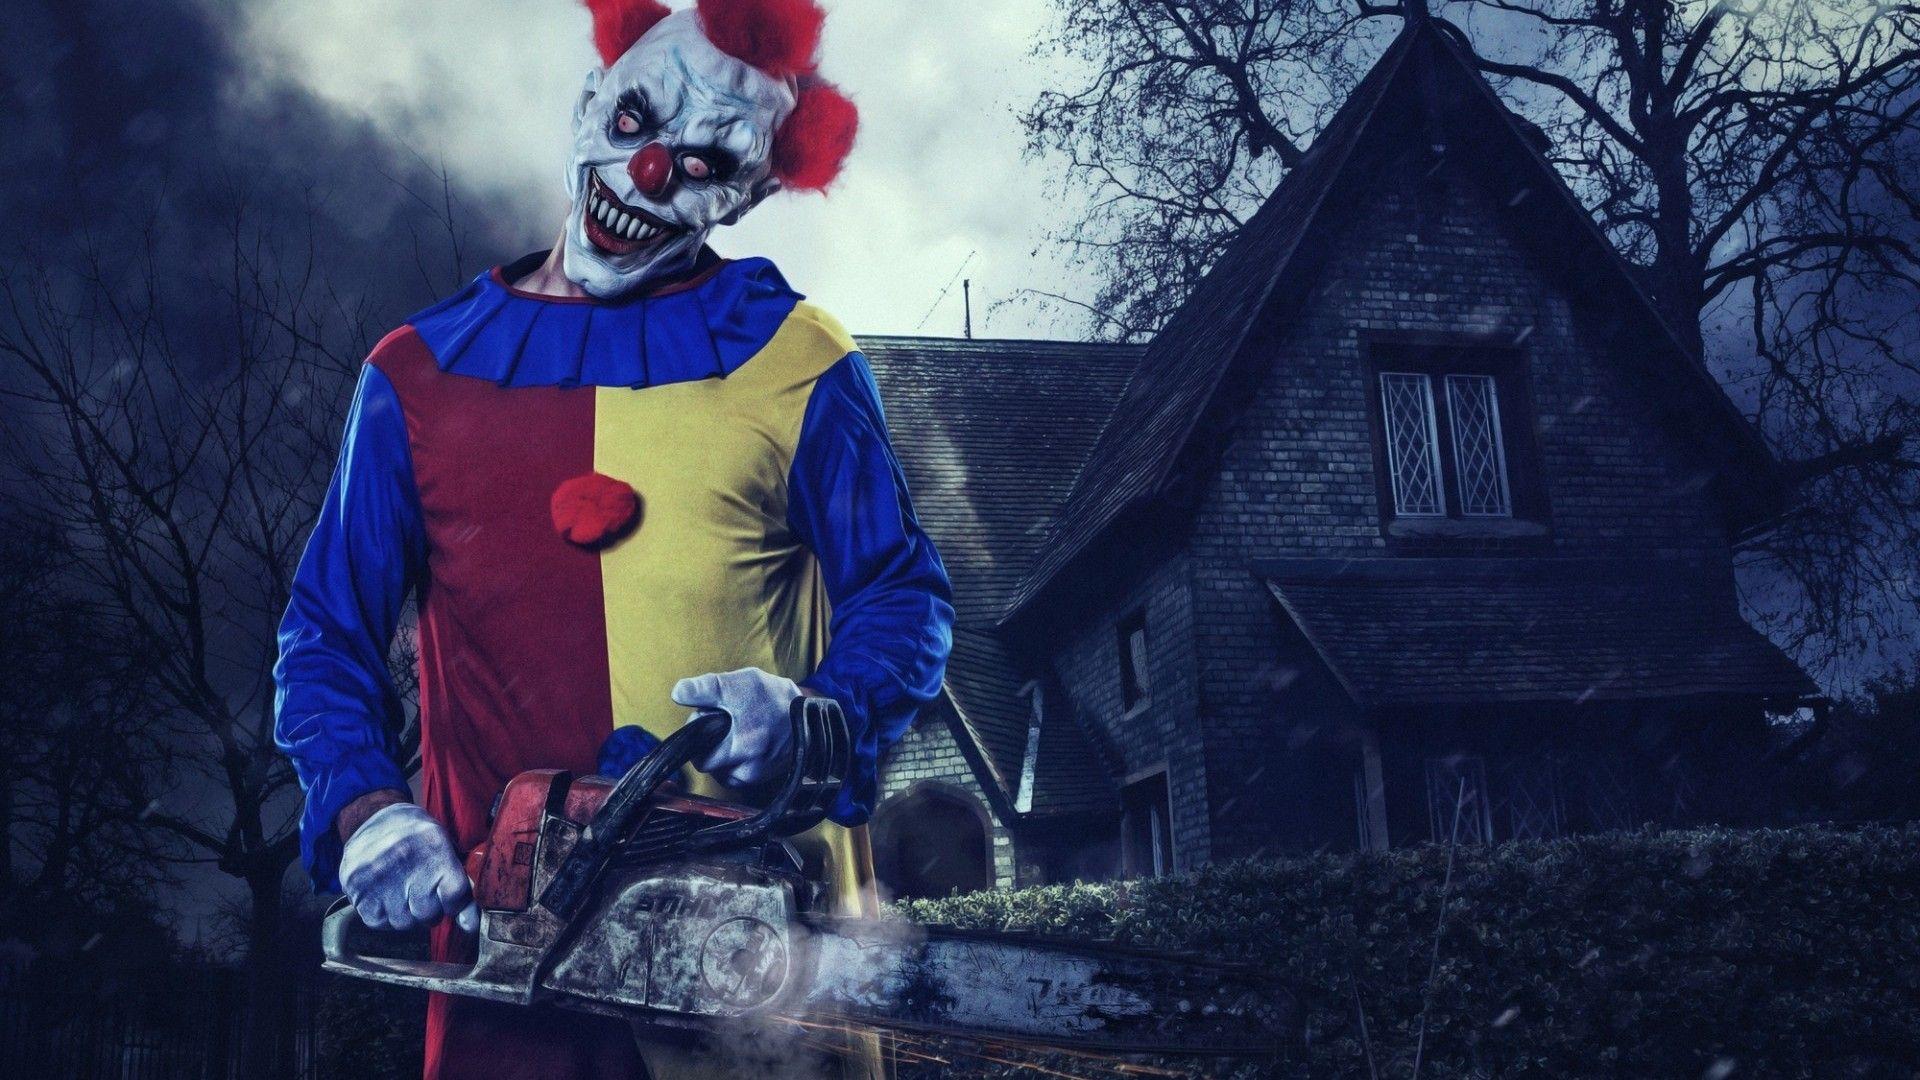 Creepy Clowns That Will Give You Nightmares. clowns